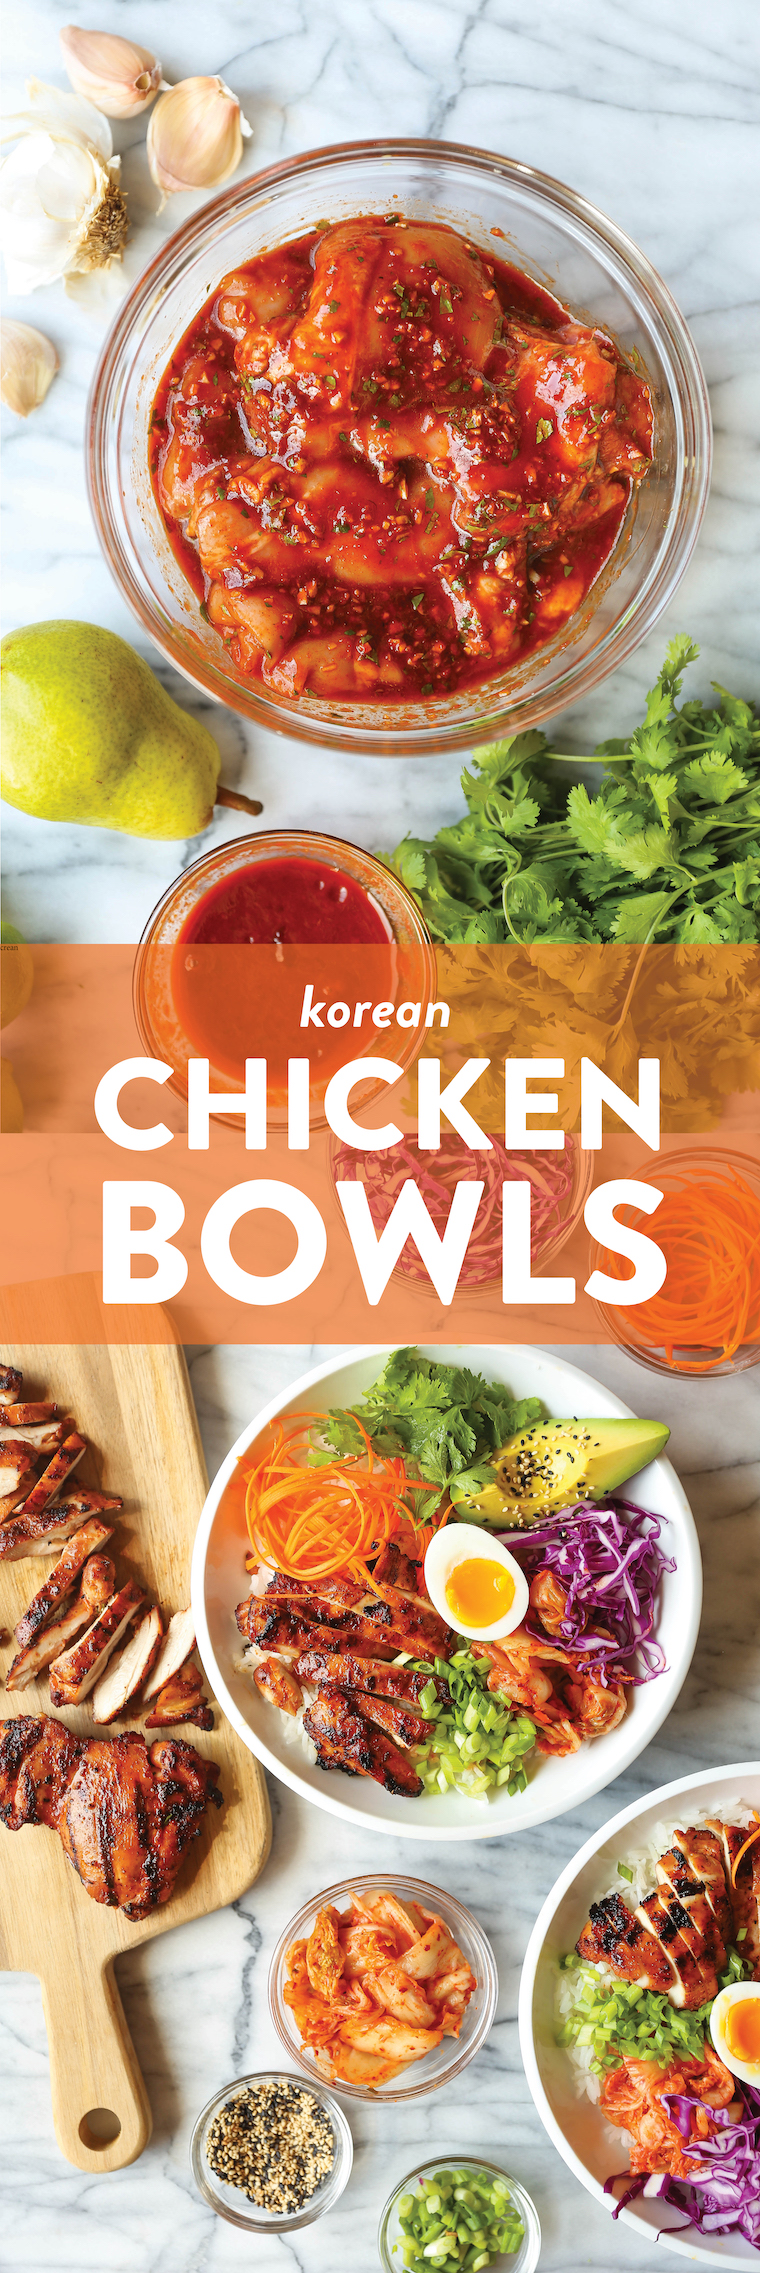 Korean Chicken Bowls - Juicy, flavorful Korean chicken bowls made with the easiest marinade ever! Serve with your choice of grain/rice and desired toppings!